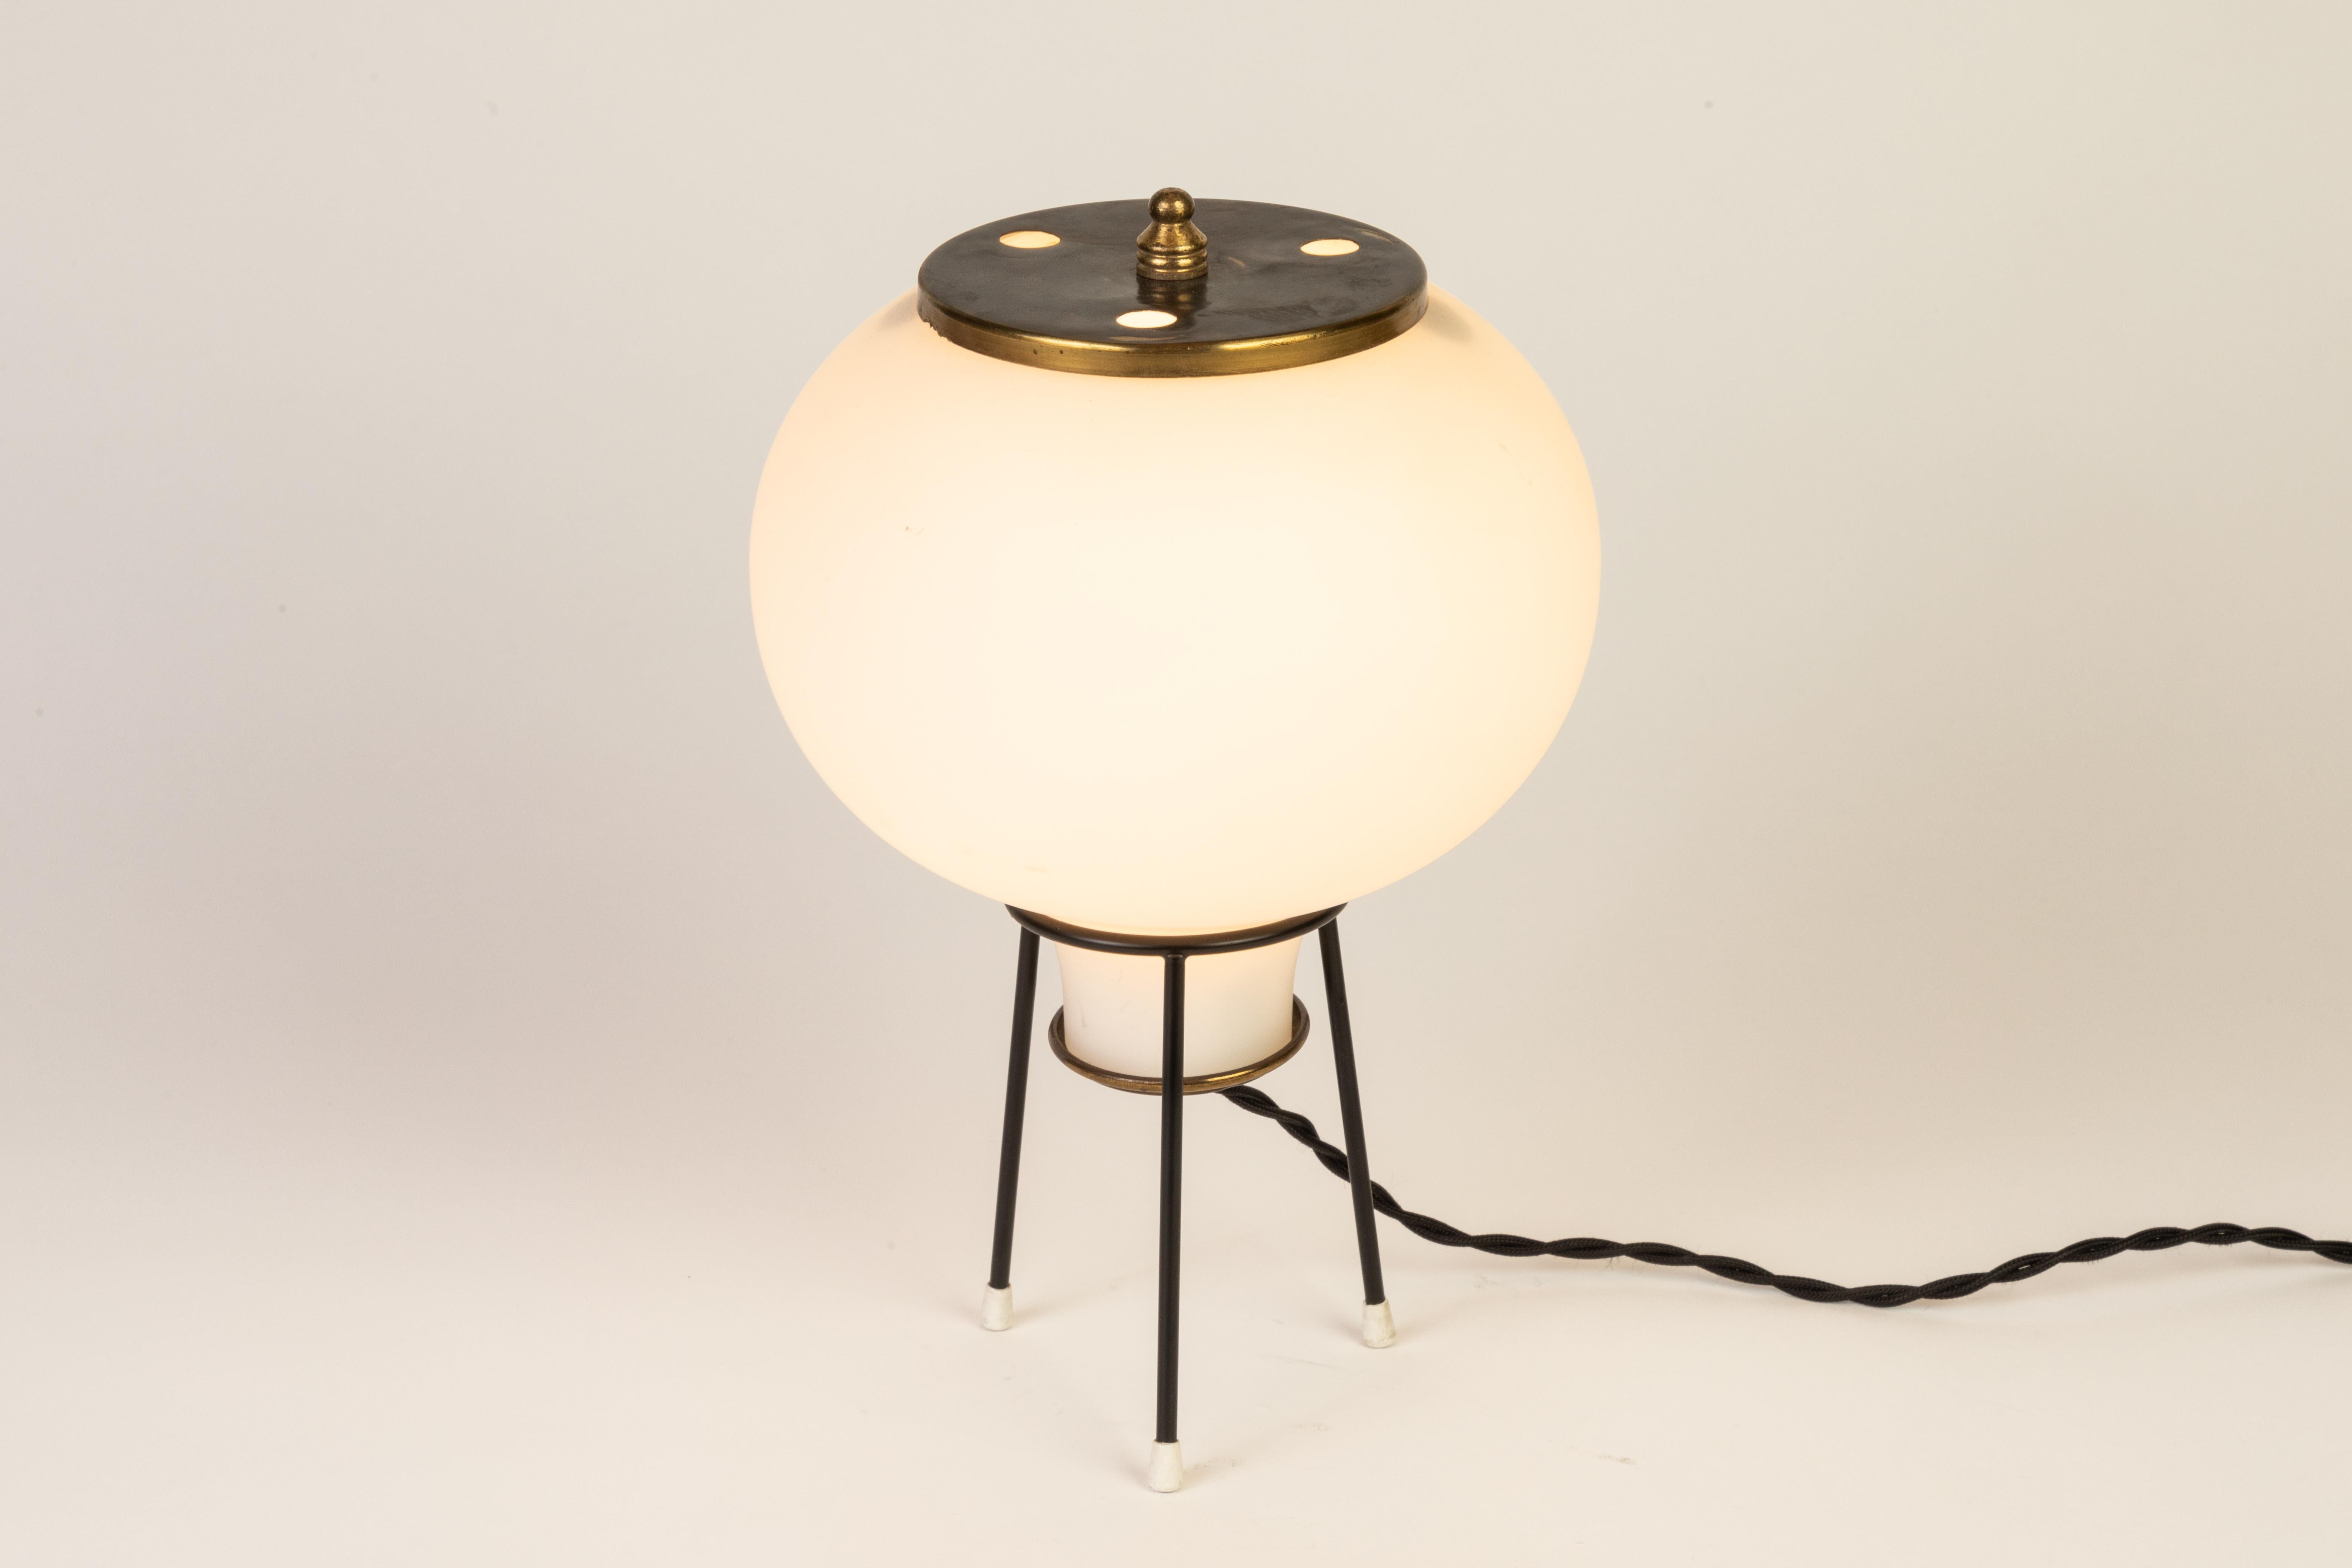 1950s Gilardi & Barzaghi glass tripod table lamp. A delicate and whimsical table lamp executed in opaline glass and brass and reminiscent of the midcentury designs of Stilnovo.

Professionally rewired for US electrical with double-twist cloth